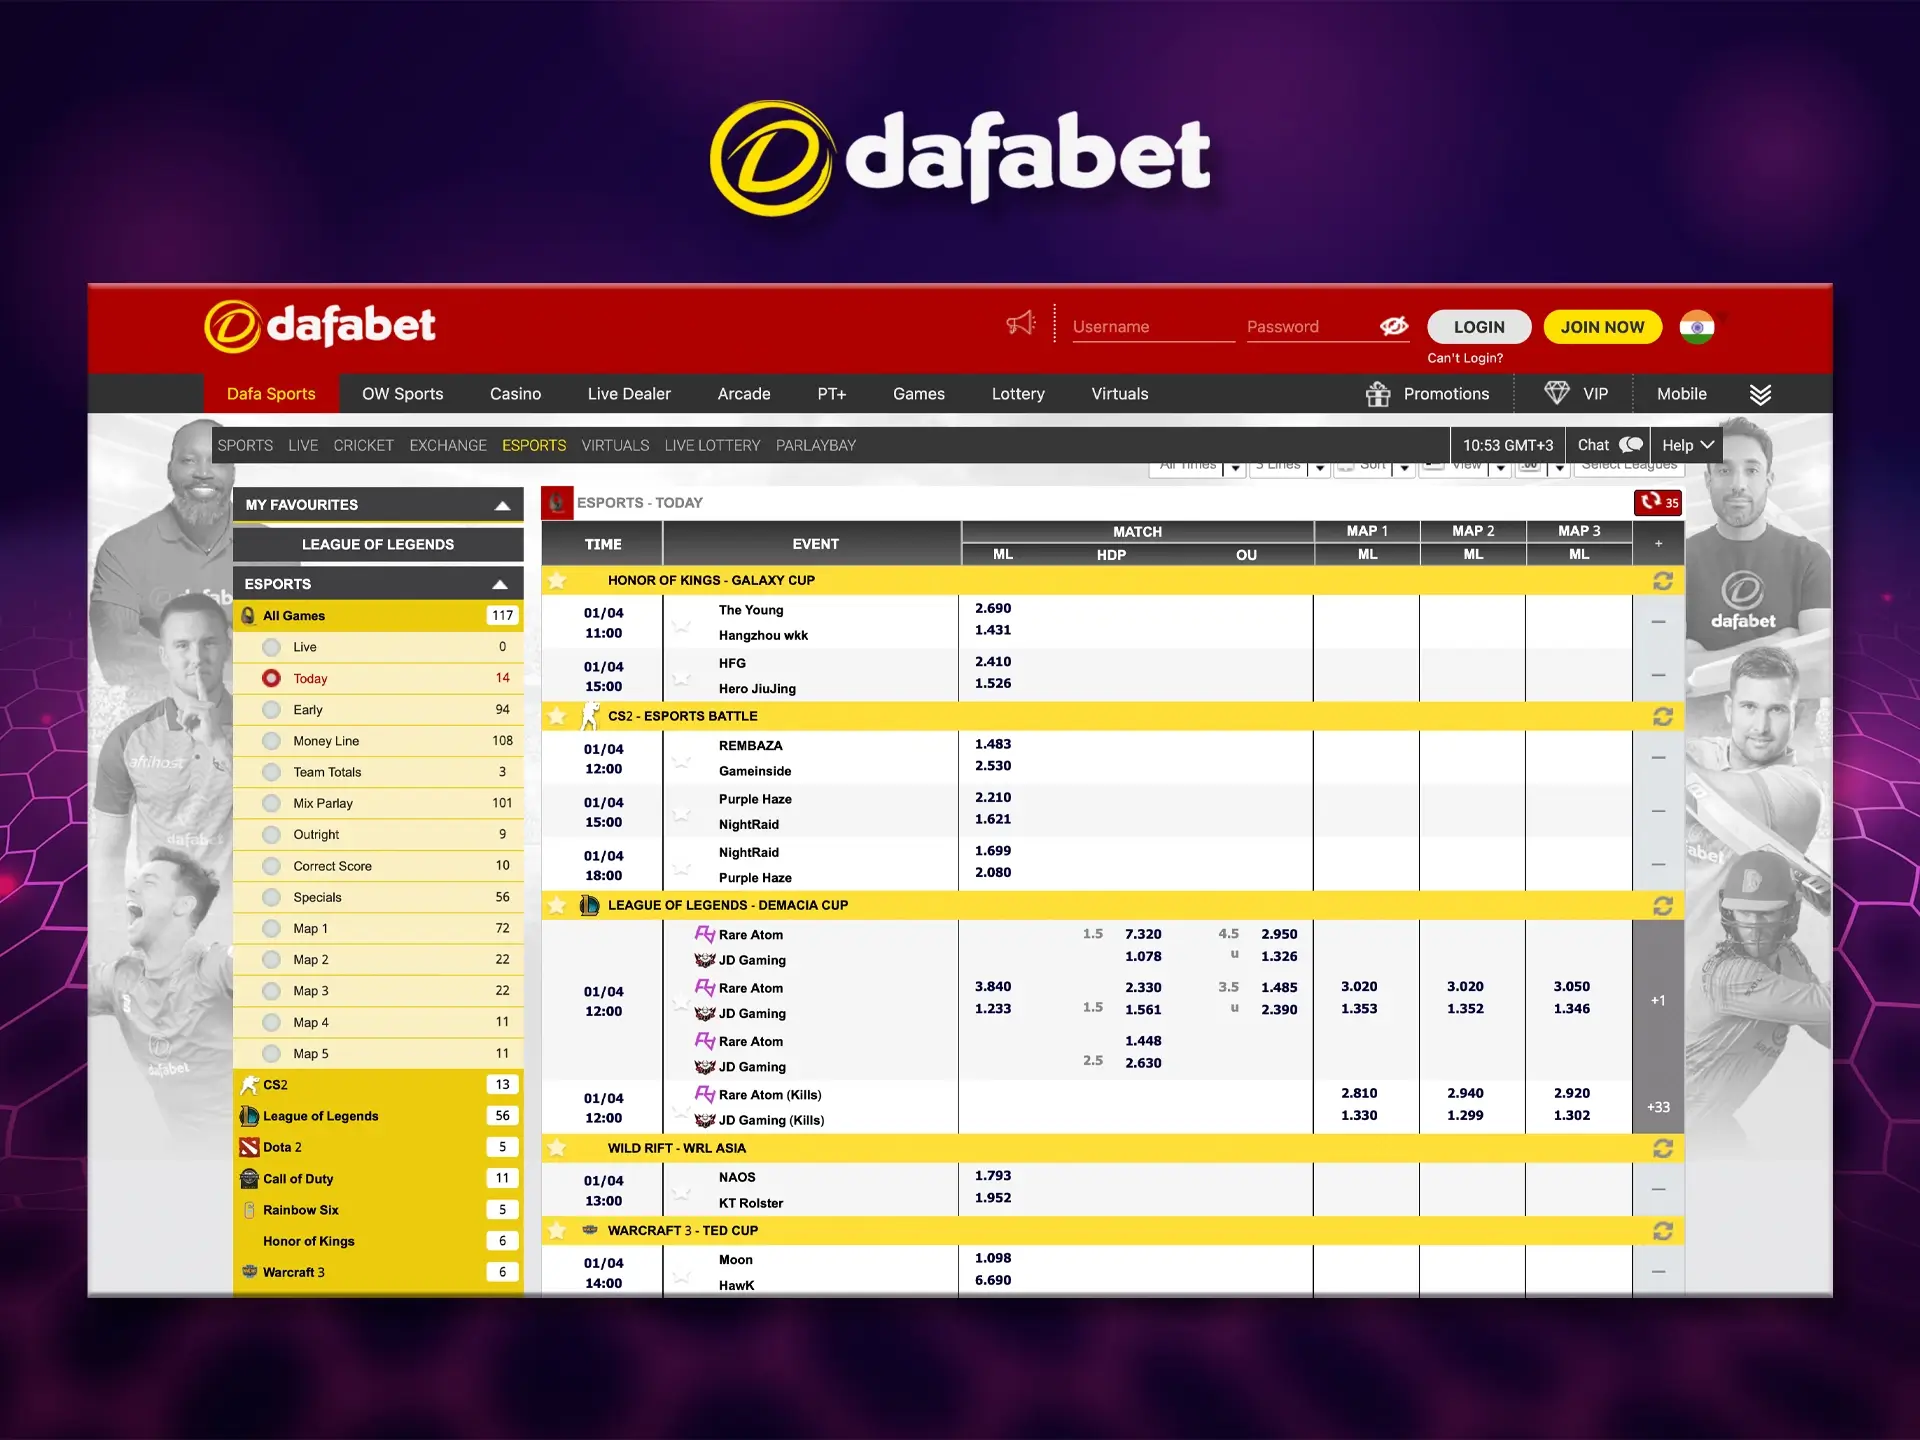 Dafabet is all about quality and taking care of its customers.